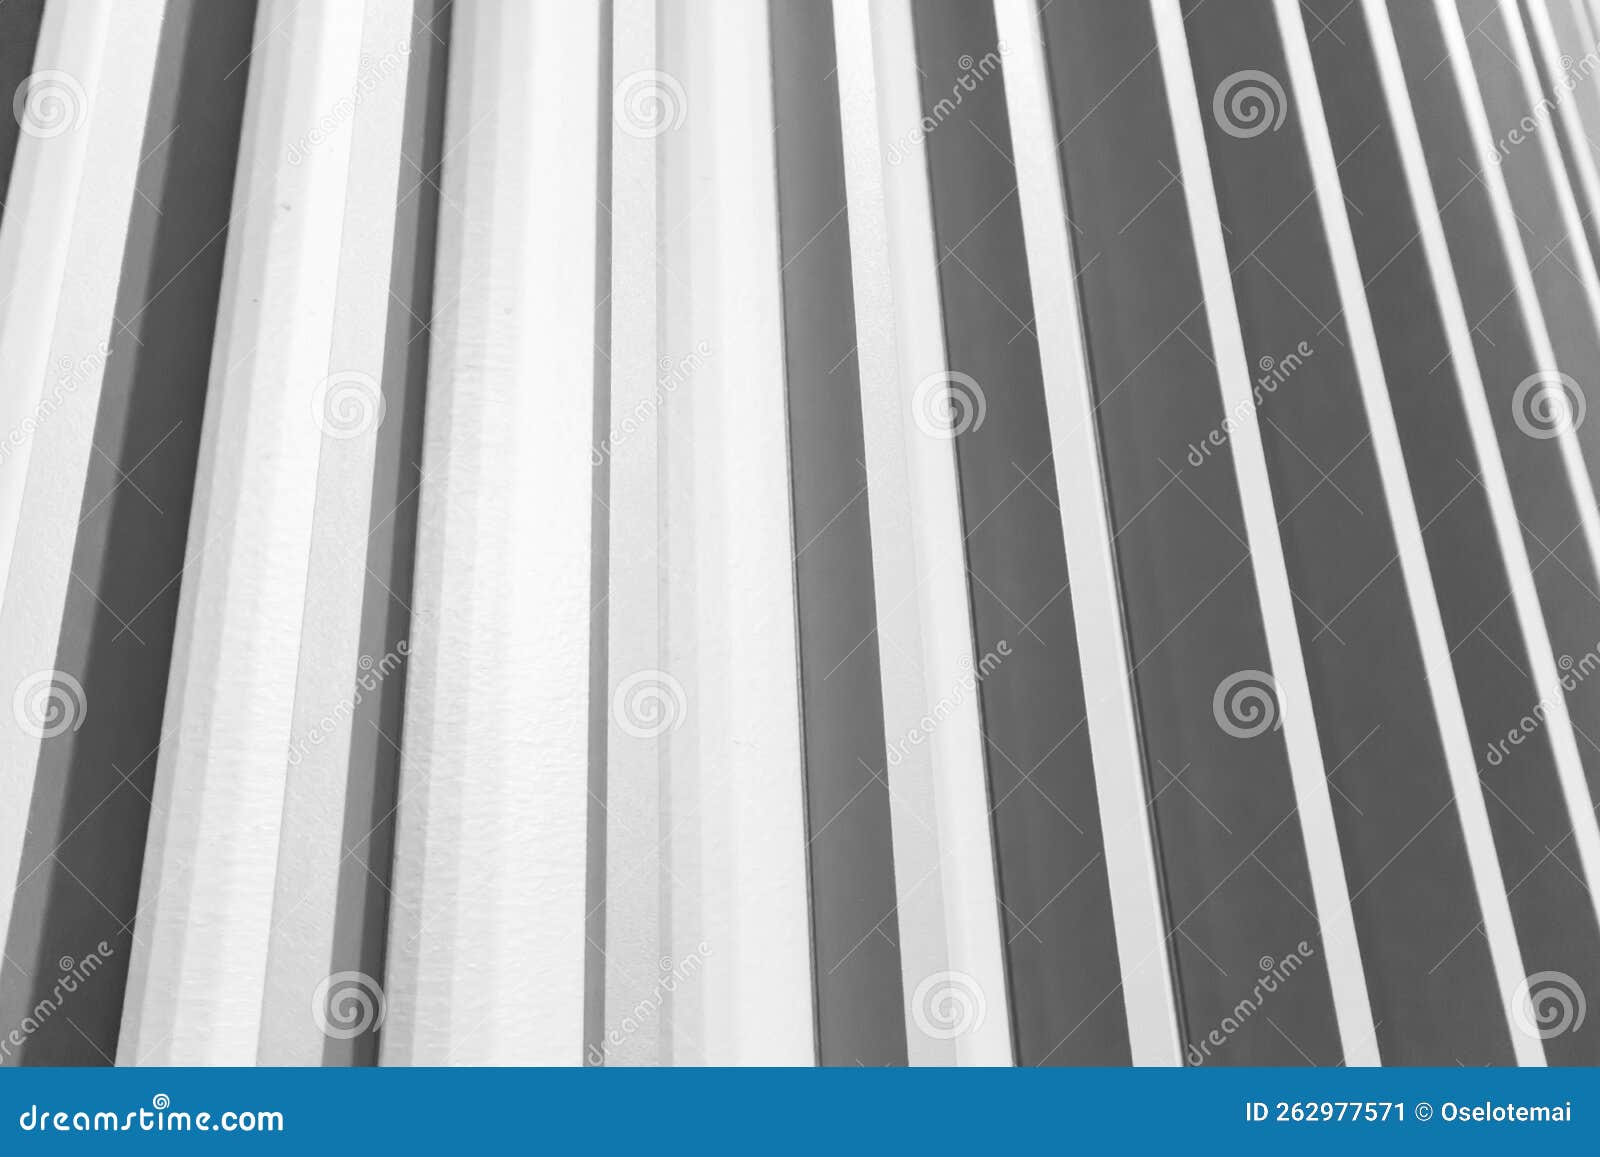 Gray and Black Vertical Line in an Abstract Background Stock Image ...